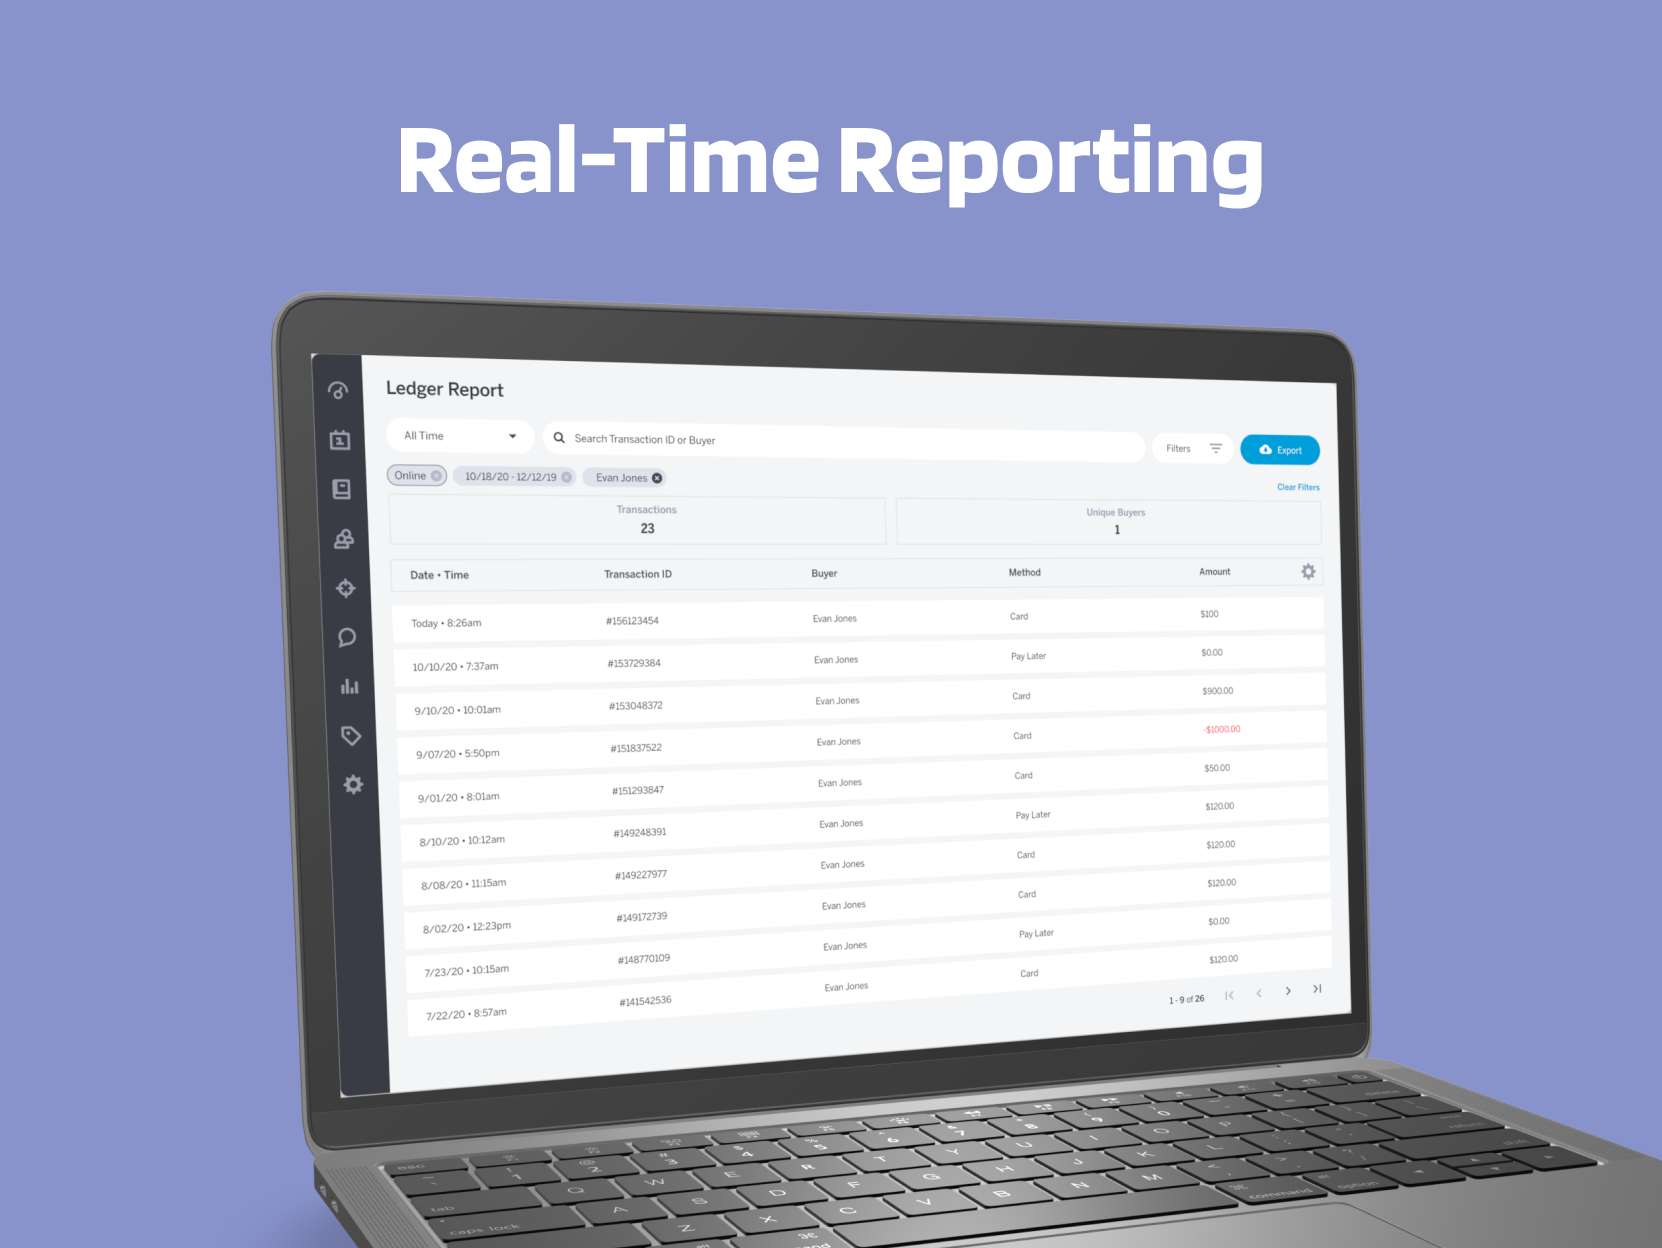 Upper Hand Software - Upper Hand empowers quicker and more informed business decisions through real-time data that’s accurate and accessible. Visualize business KPIs over time, discover buyer trends, & detect impending blockers to growth.